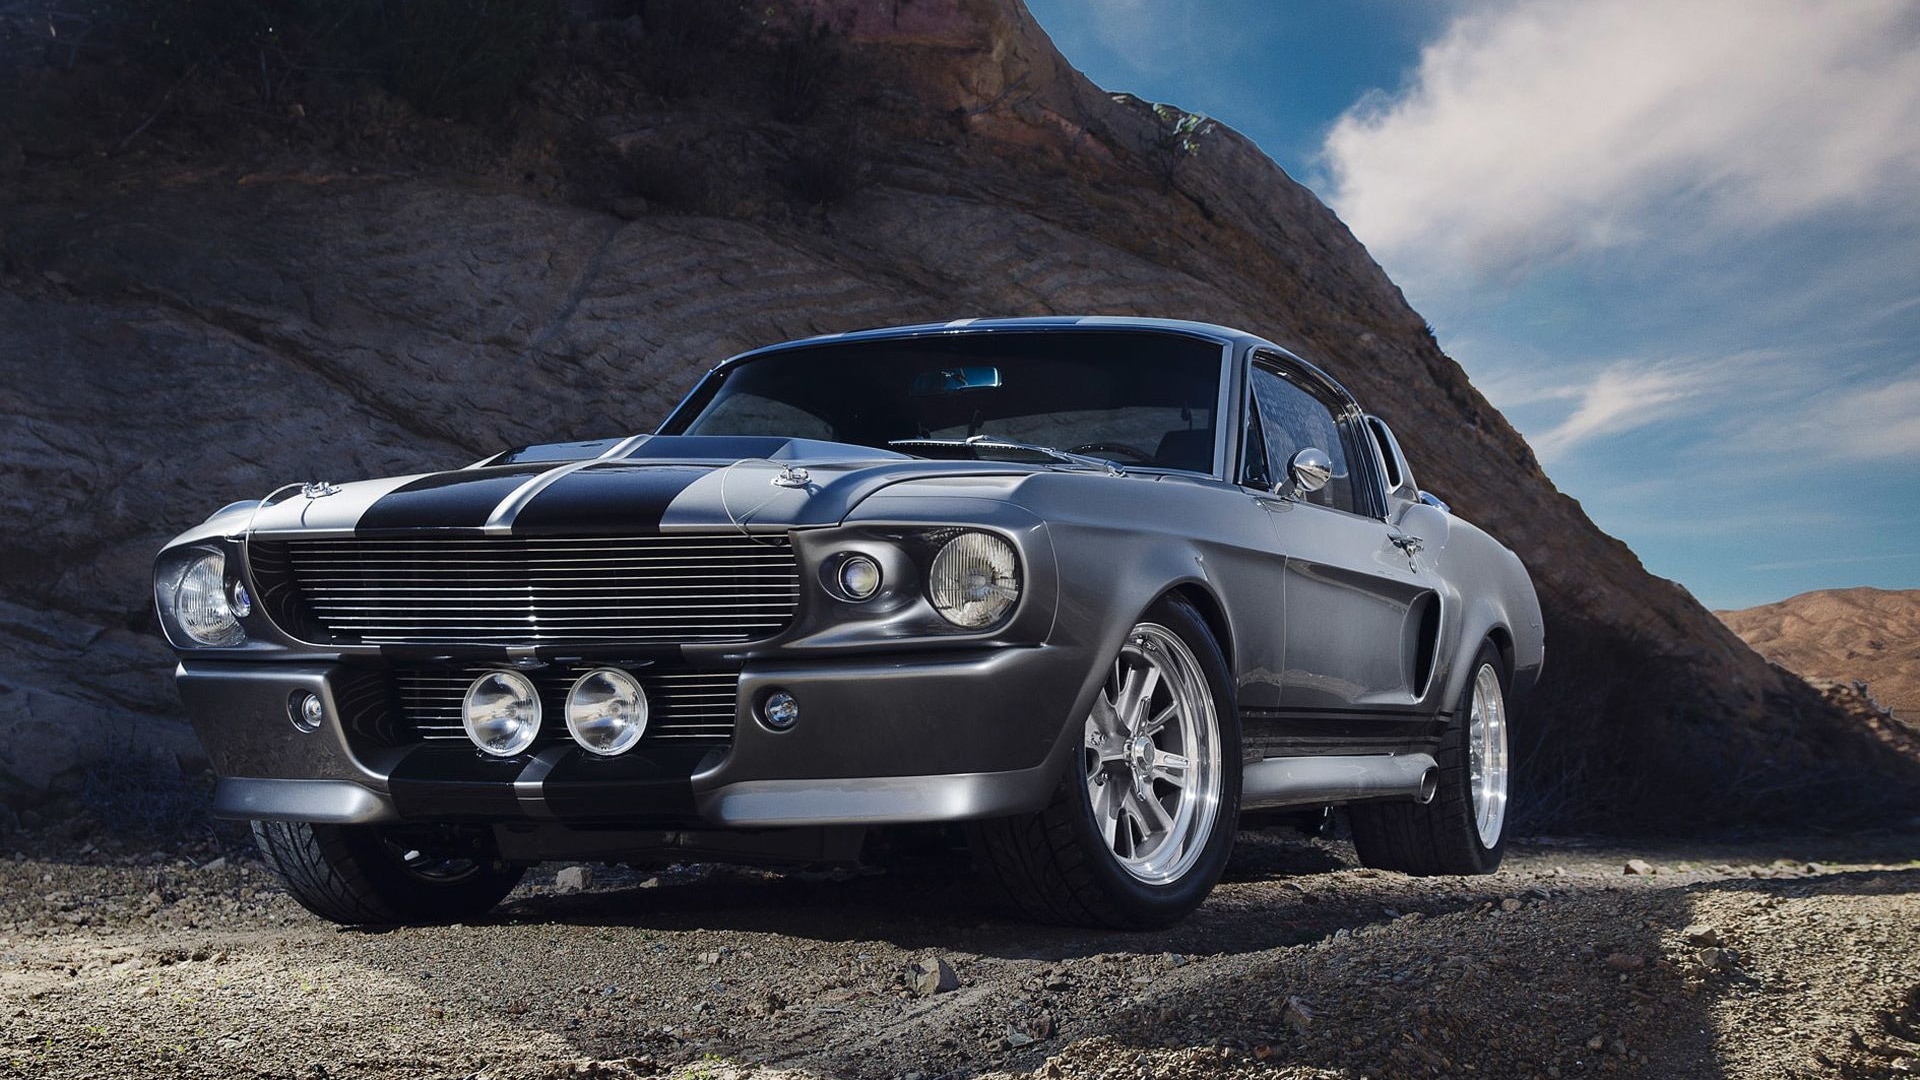 “Gone in 60 Seconds” Ford Mustang Eleanor recreation by Fusion Motor Company